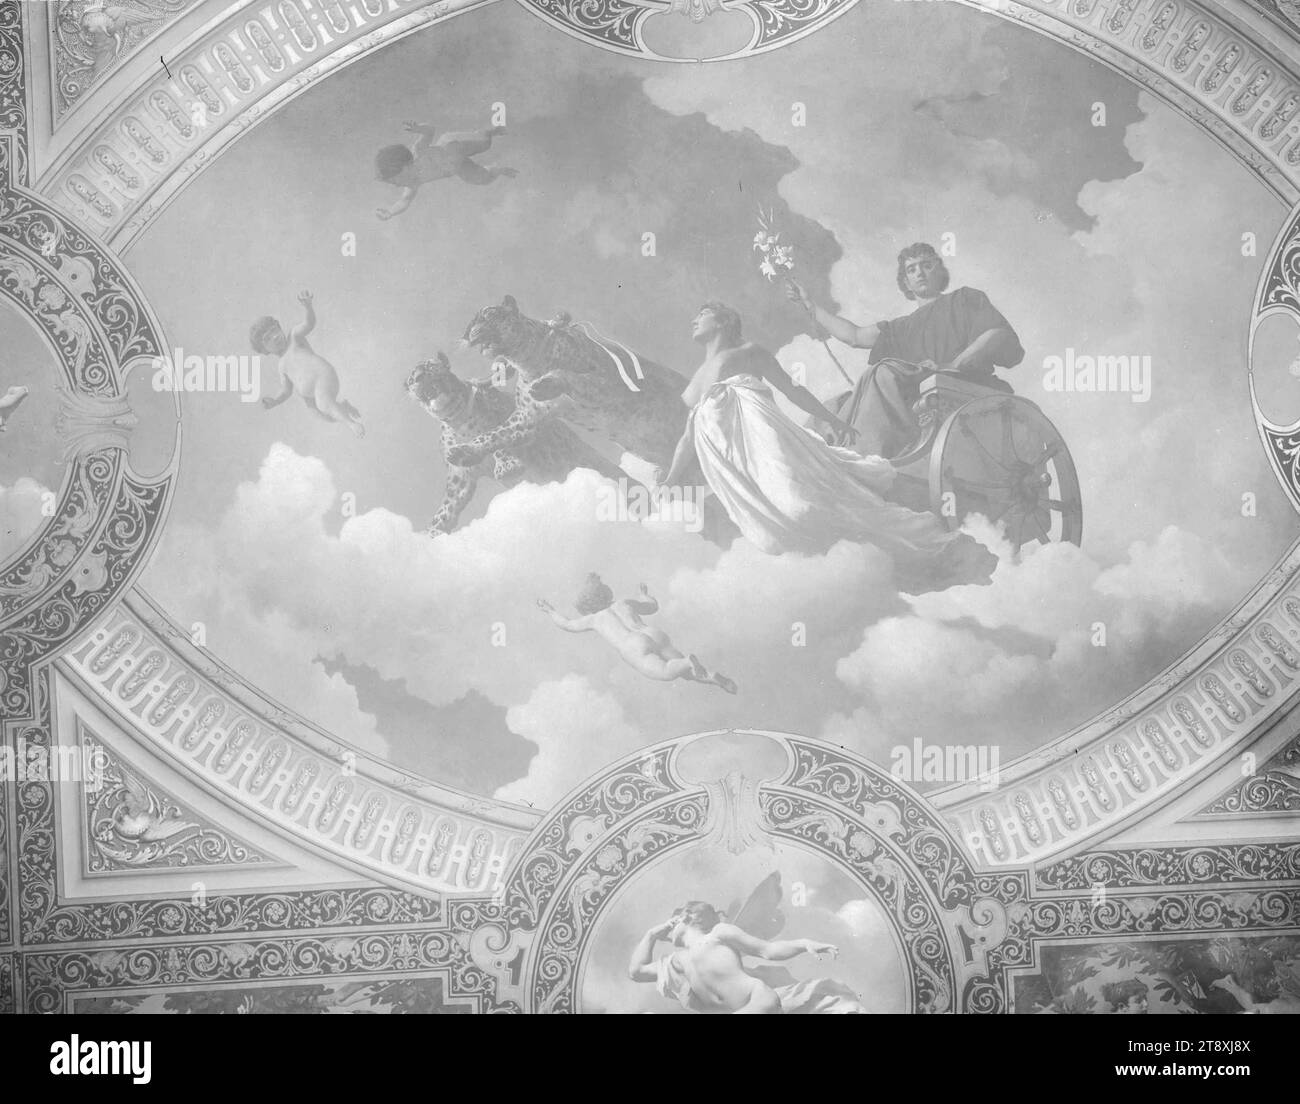 Oberon and Titania, ceiling painting in the bedroom of Empress Elisabeth in the Hermes Villa, Martin Gerlach jun. (1879-1944), photographer, Hugo Charlemont (1850-1939), artist, date circa 1940, glass, negative, height 23.9 cm, width 29.9 cm, housing, fine arts, 13: Hietzing, bedroom, The Vienna Collection Stock Photo